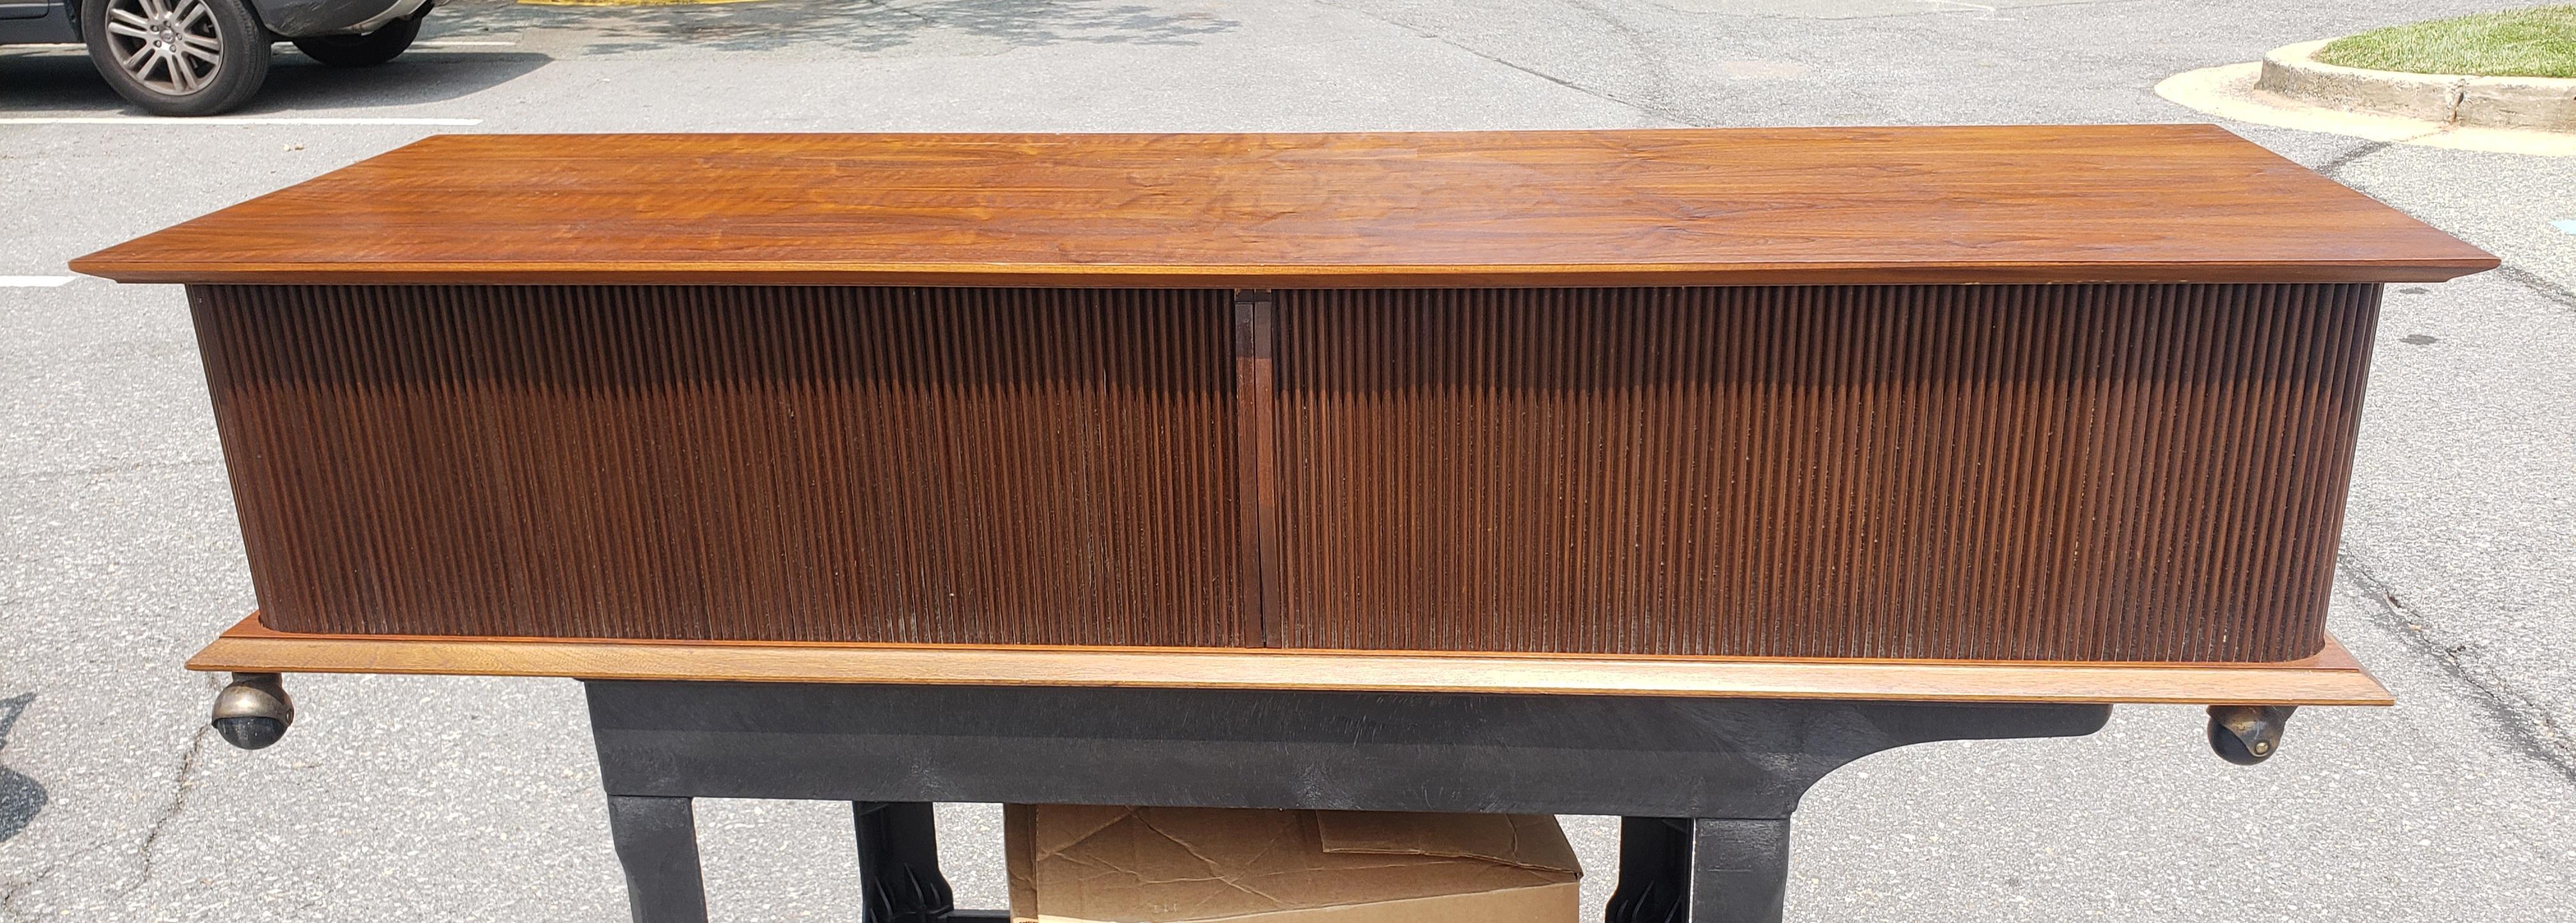 Lane Mid-Century Modern Style Teak And Tambour Door Base Rolling Coffee Table For Sale 1